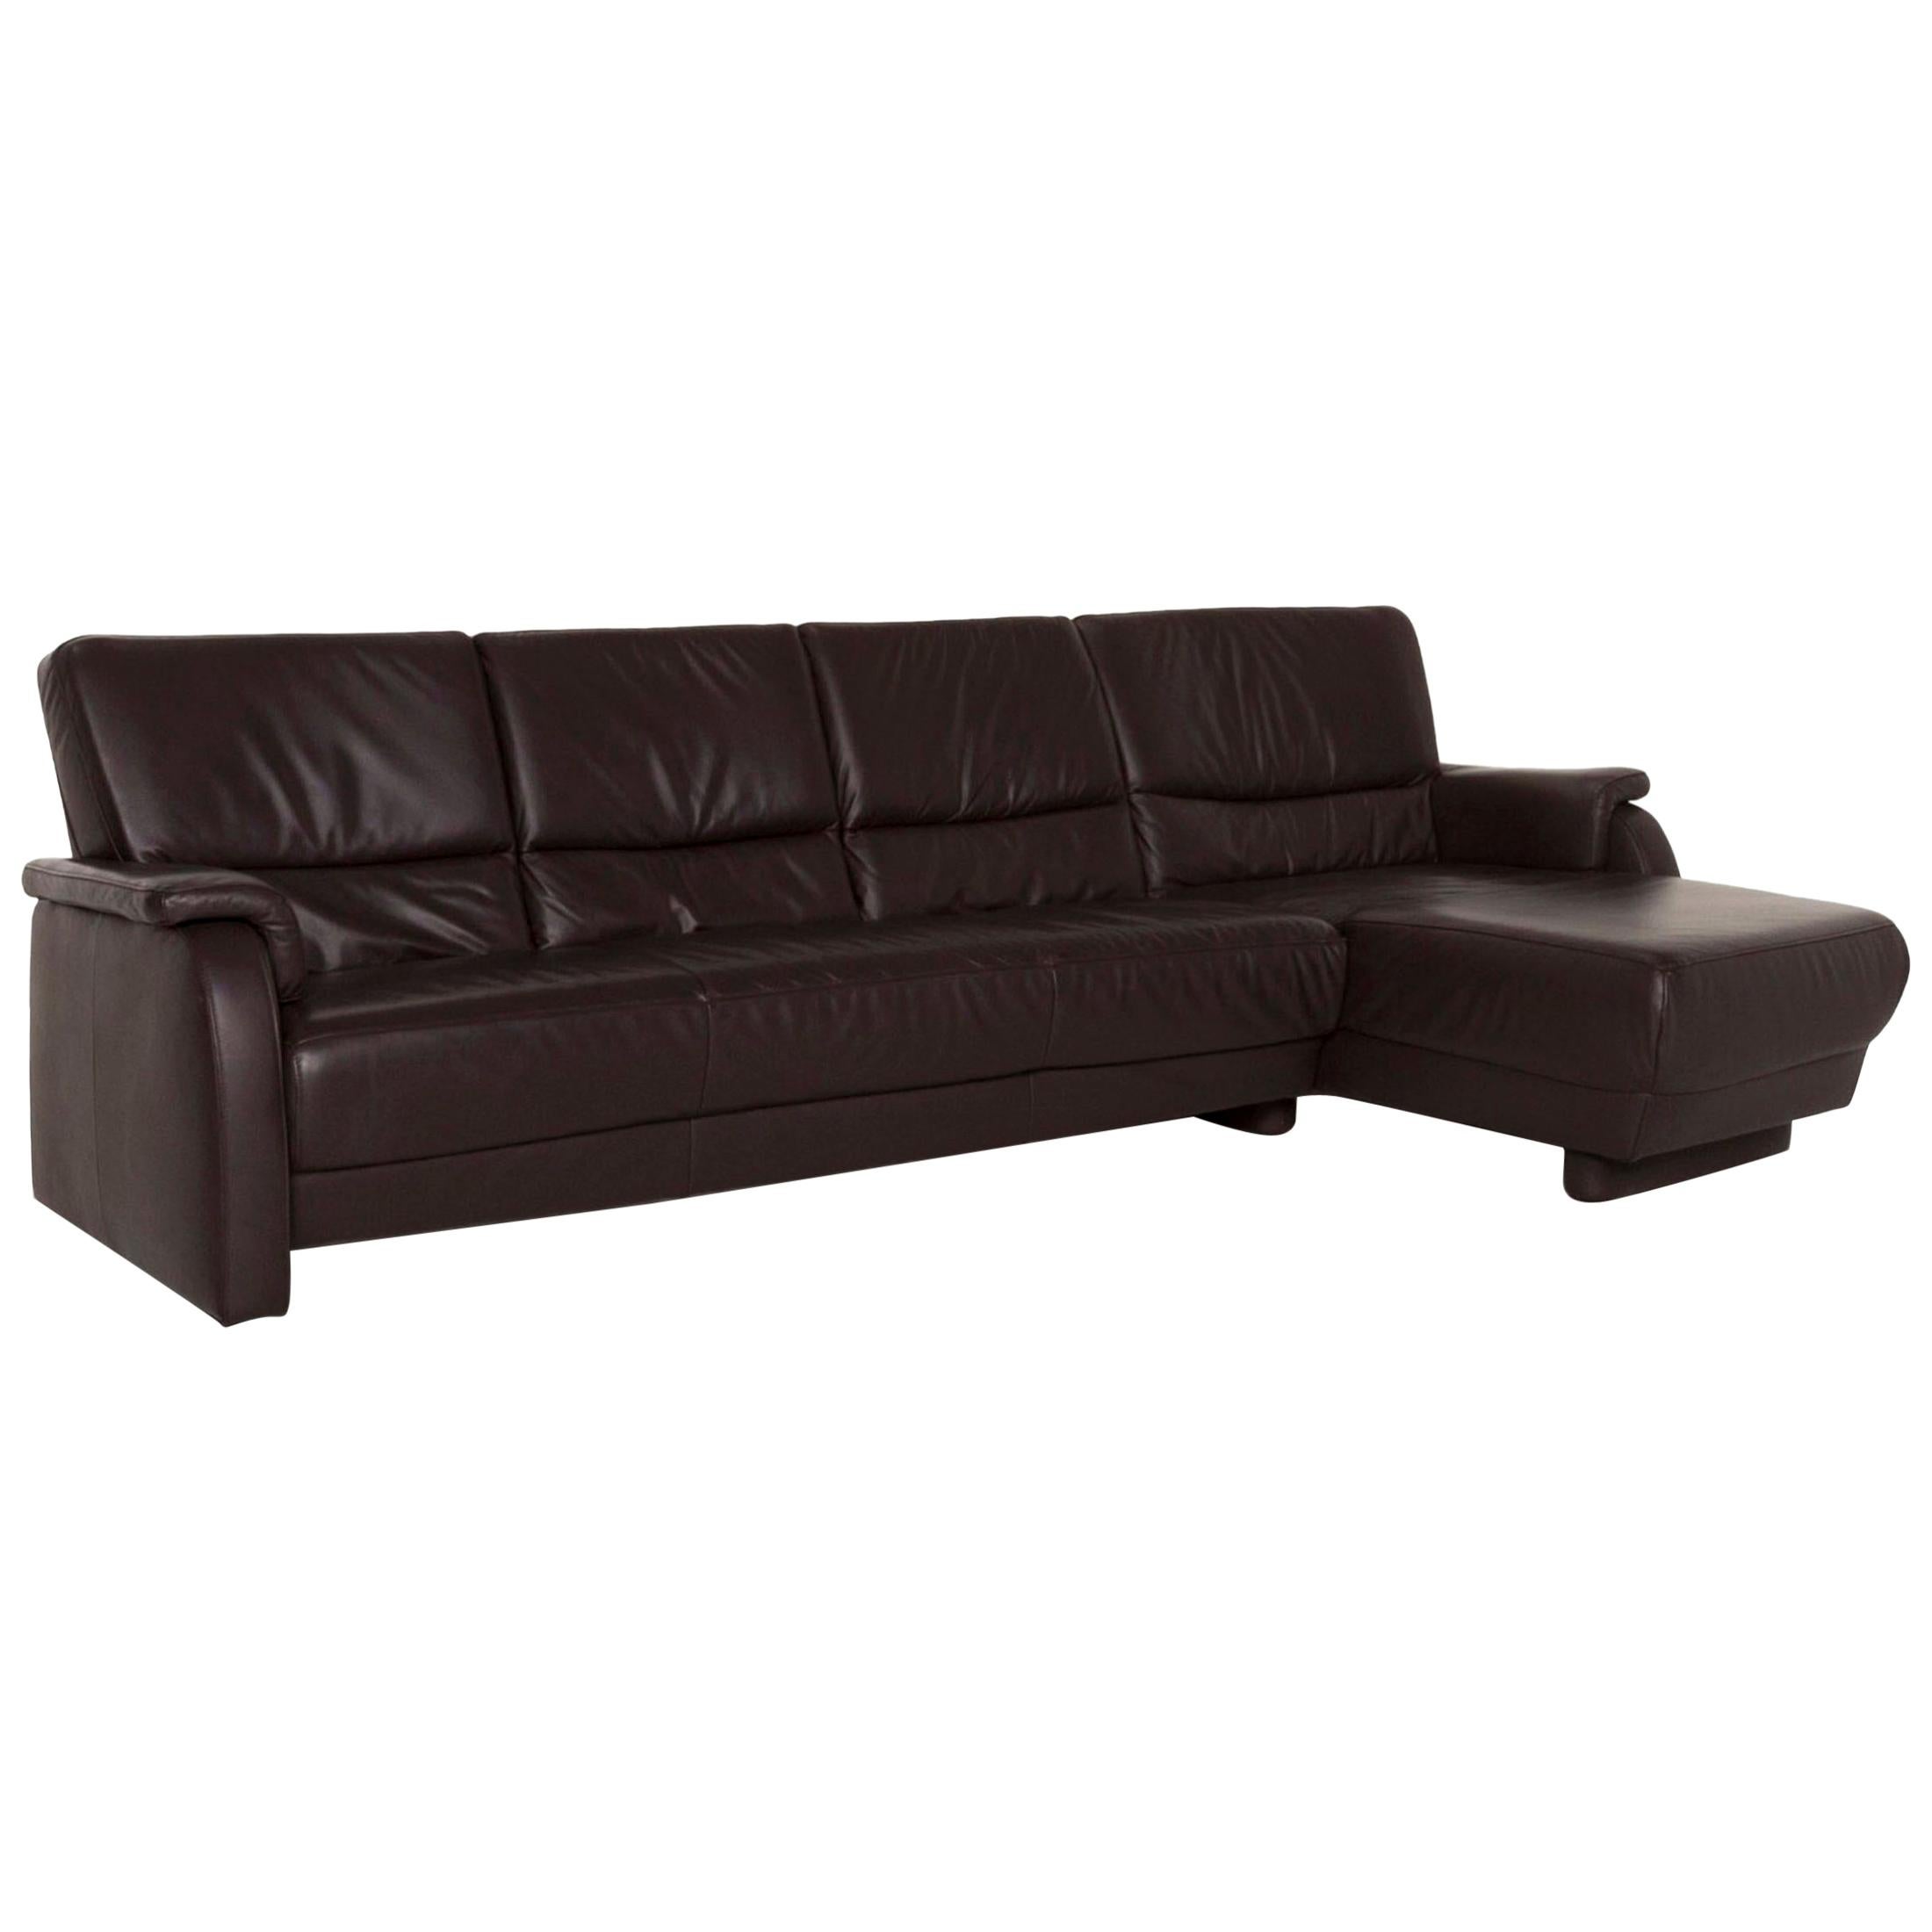 Himolla Leather Corner Sofa Brown Dark Brown Couch For Sale